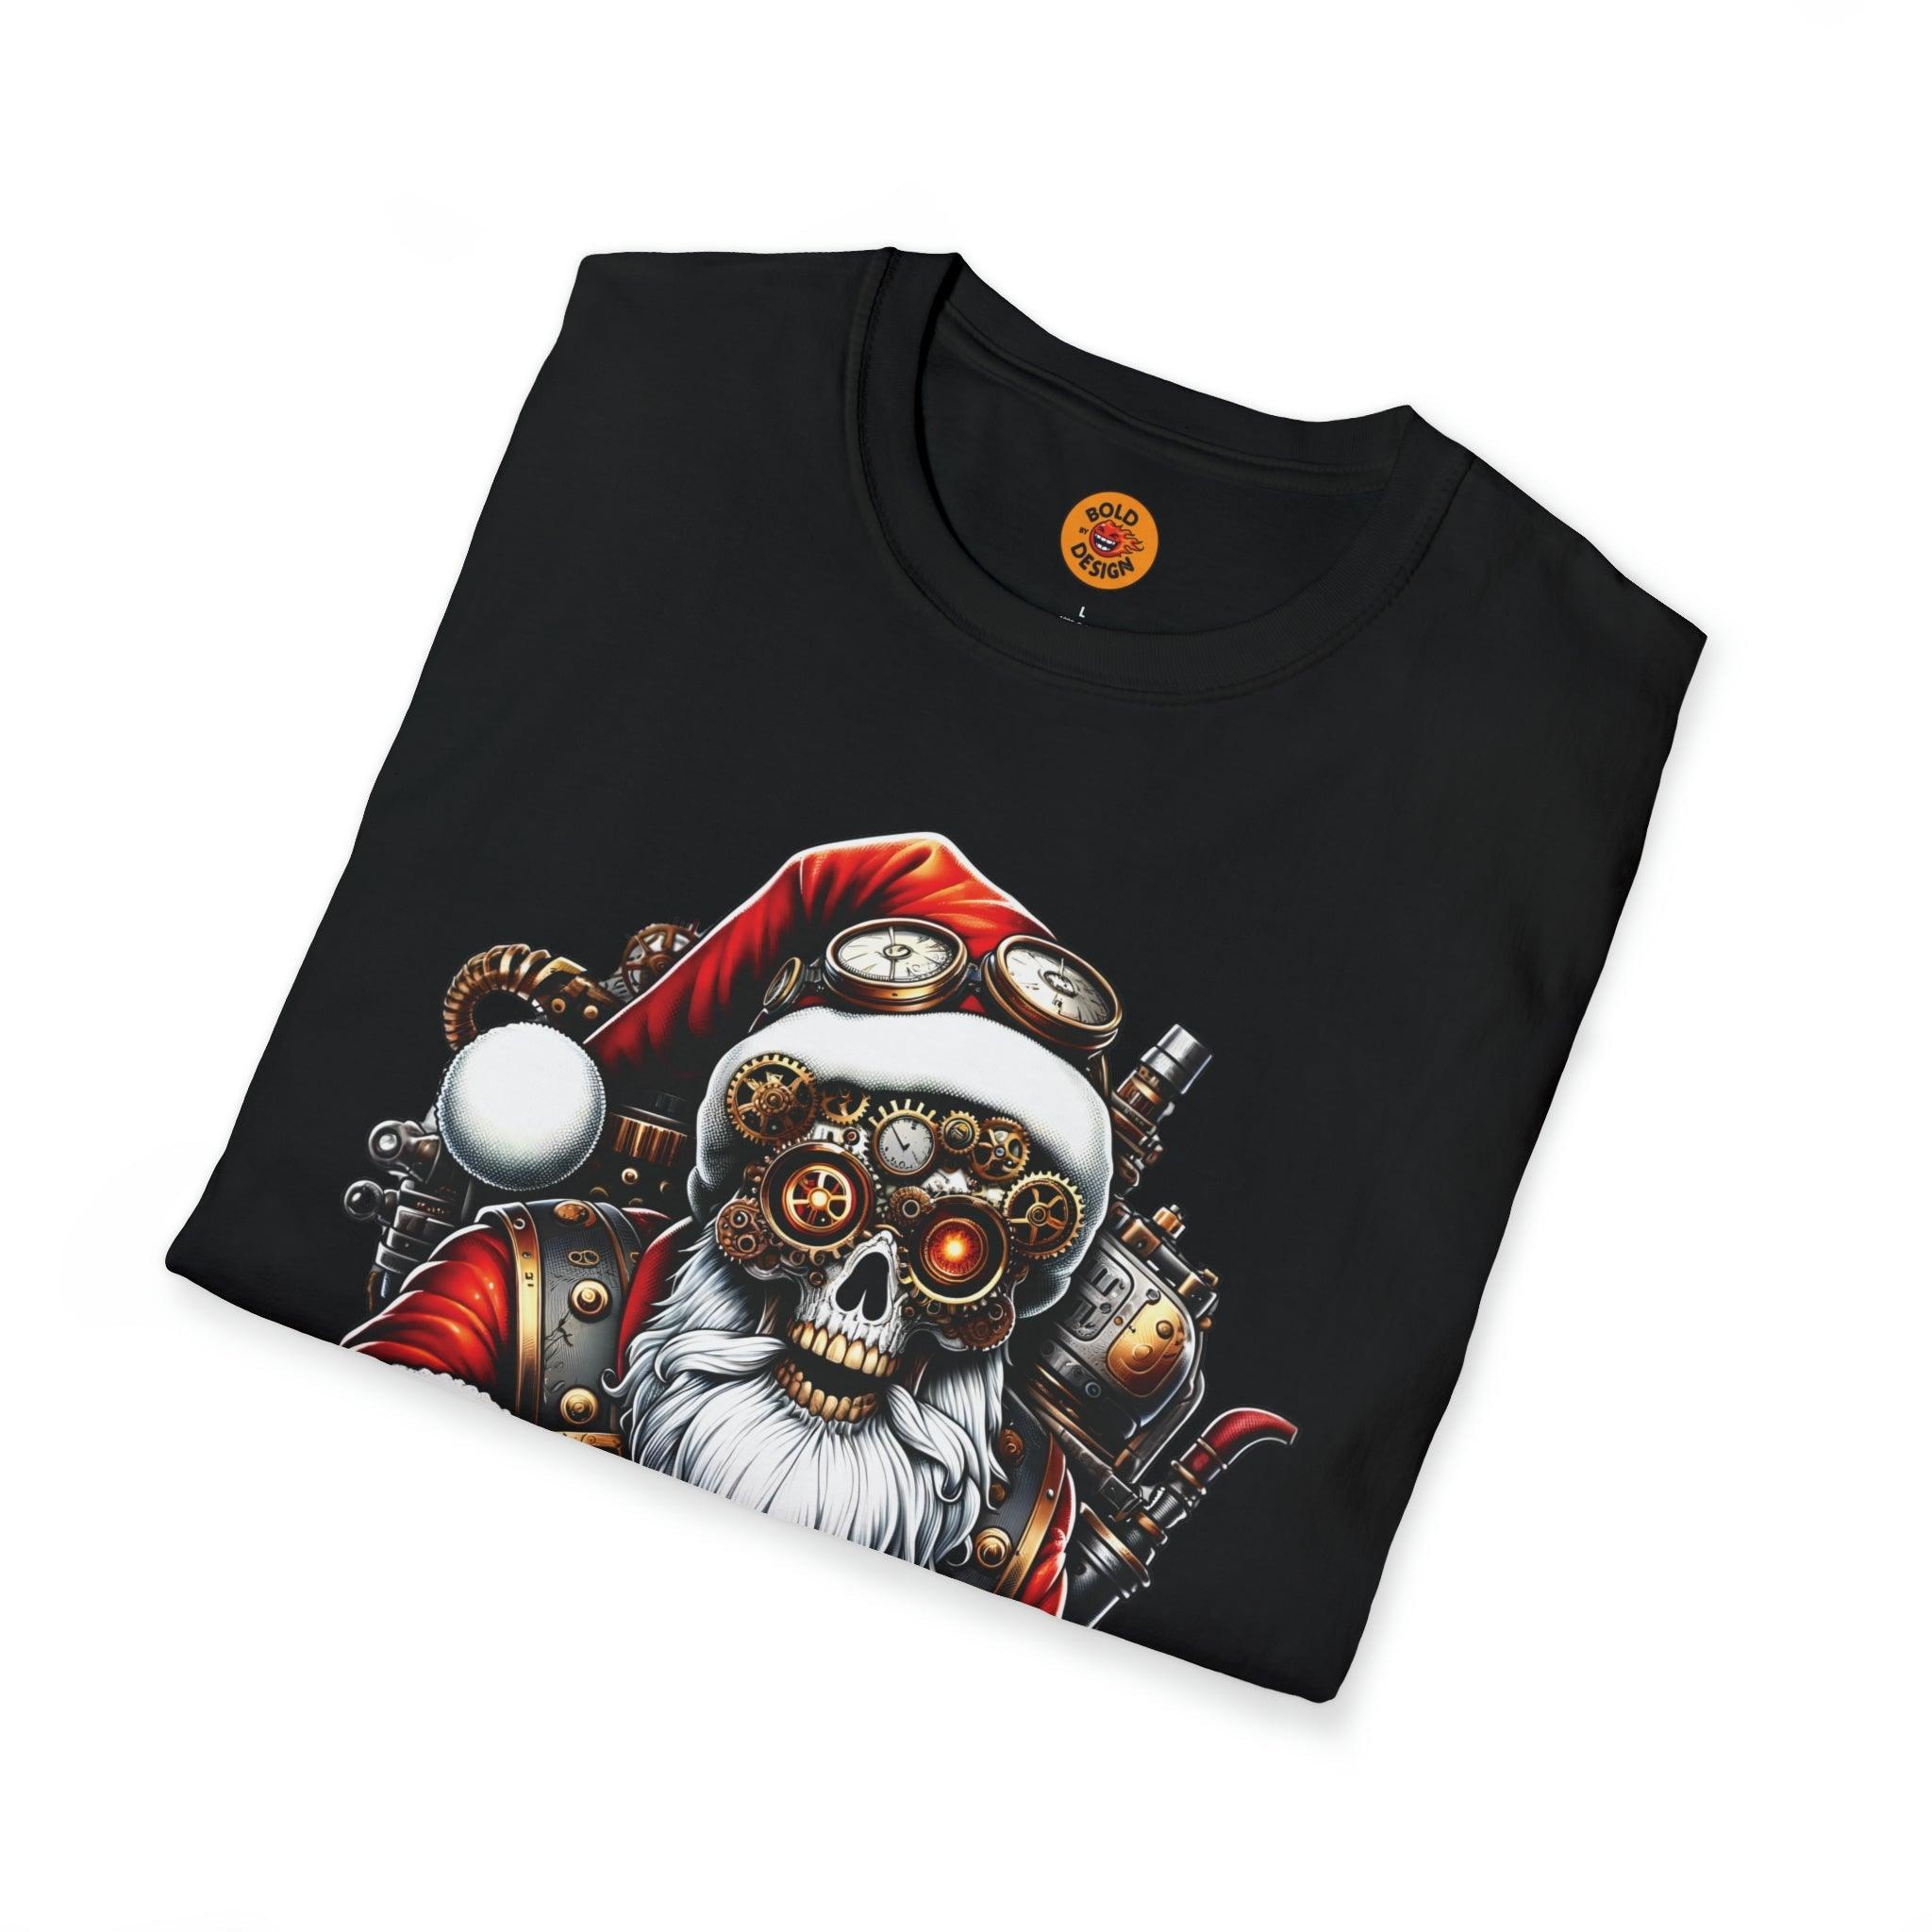 Steampunk Santa Claus Tee with Coal Sack-Bold By Design